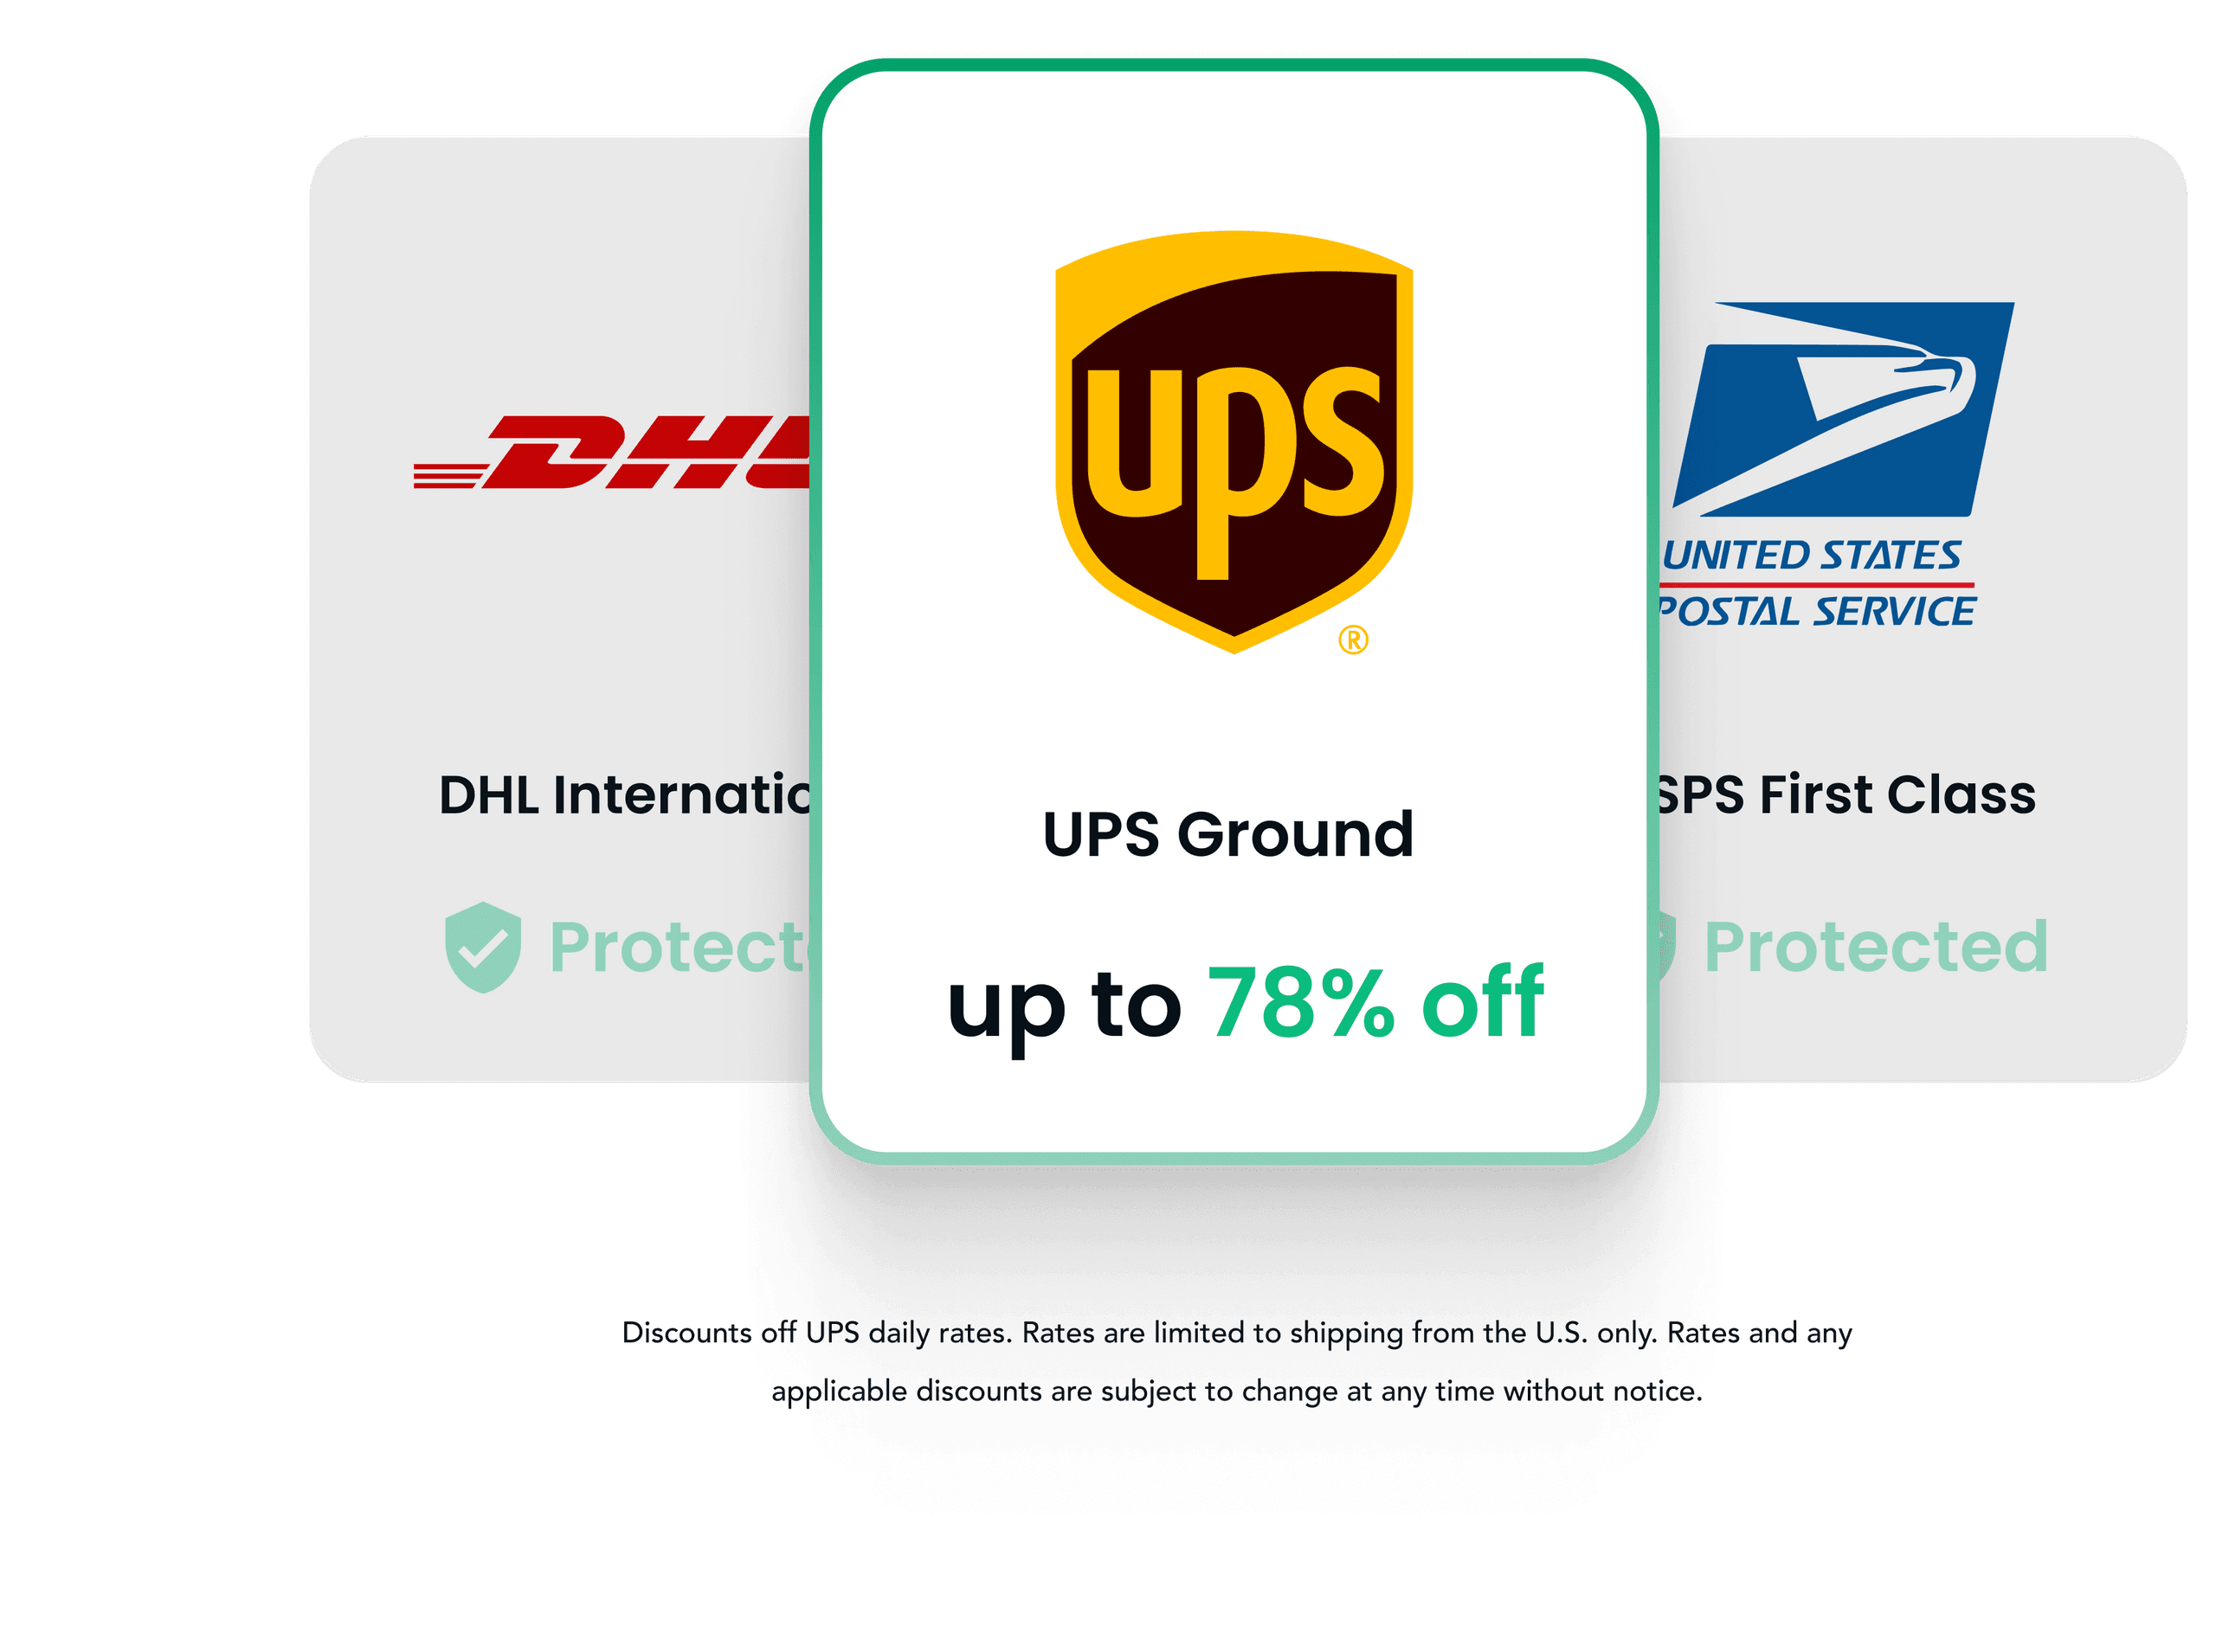 Save up to 78% on UPS Ground labels on your eBay, Etsy, Shopify & Walmart orders.